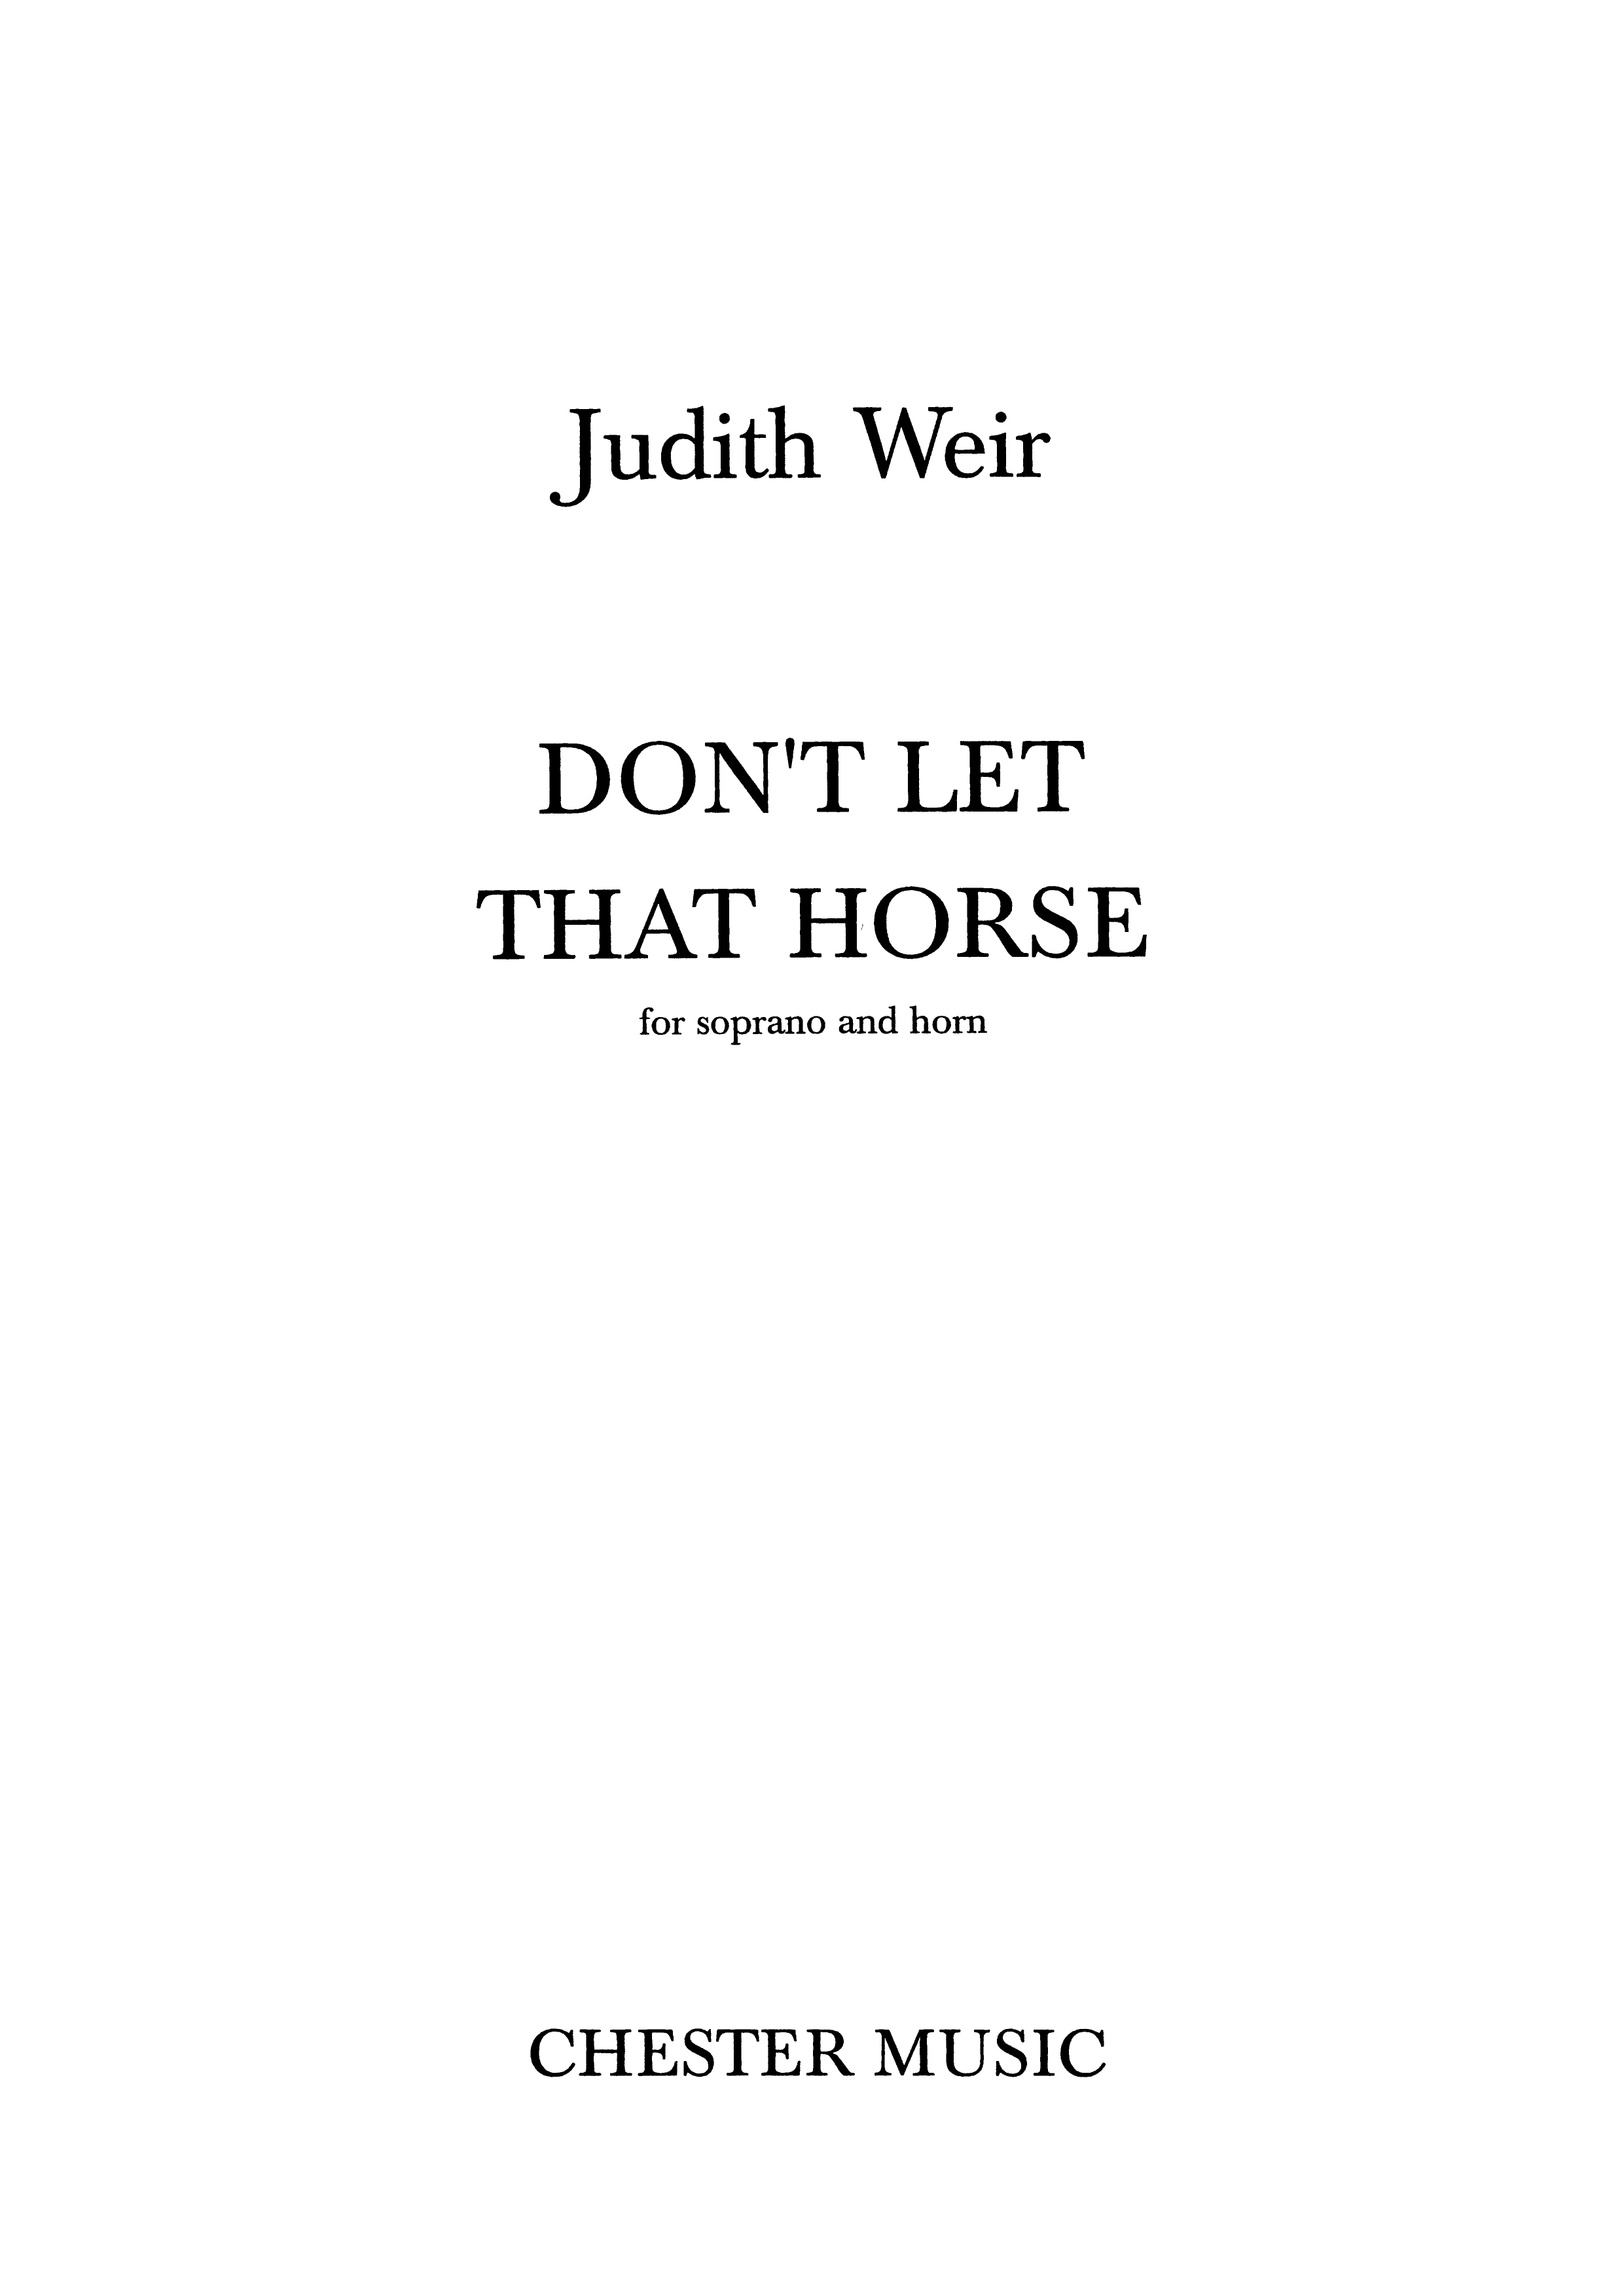 Judith Weir: Don't Let That Horse